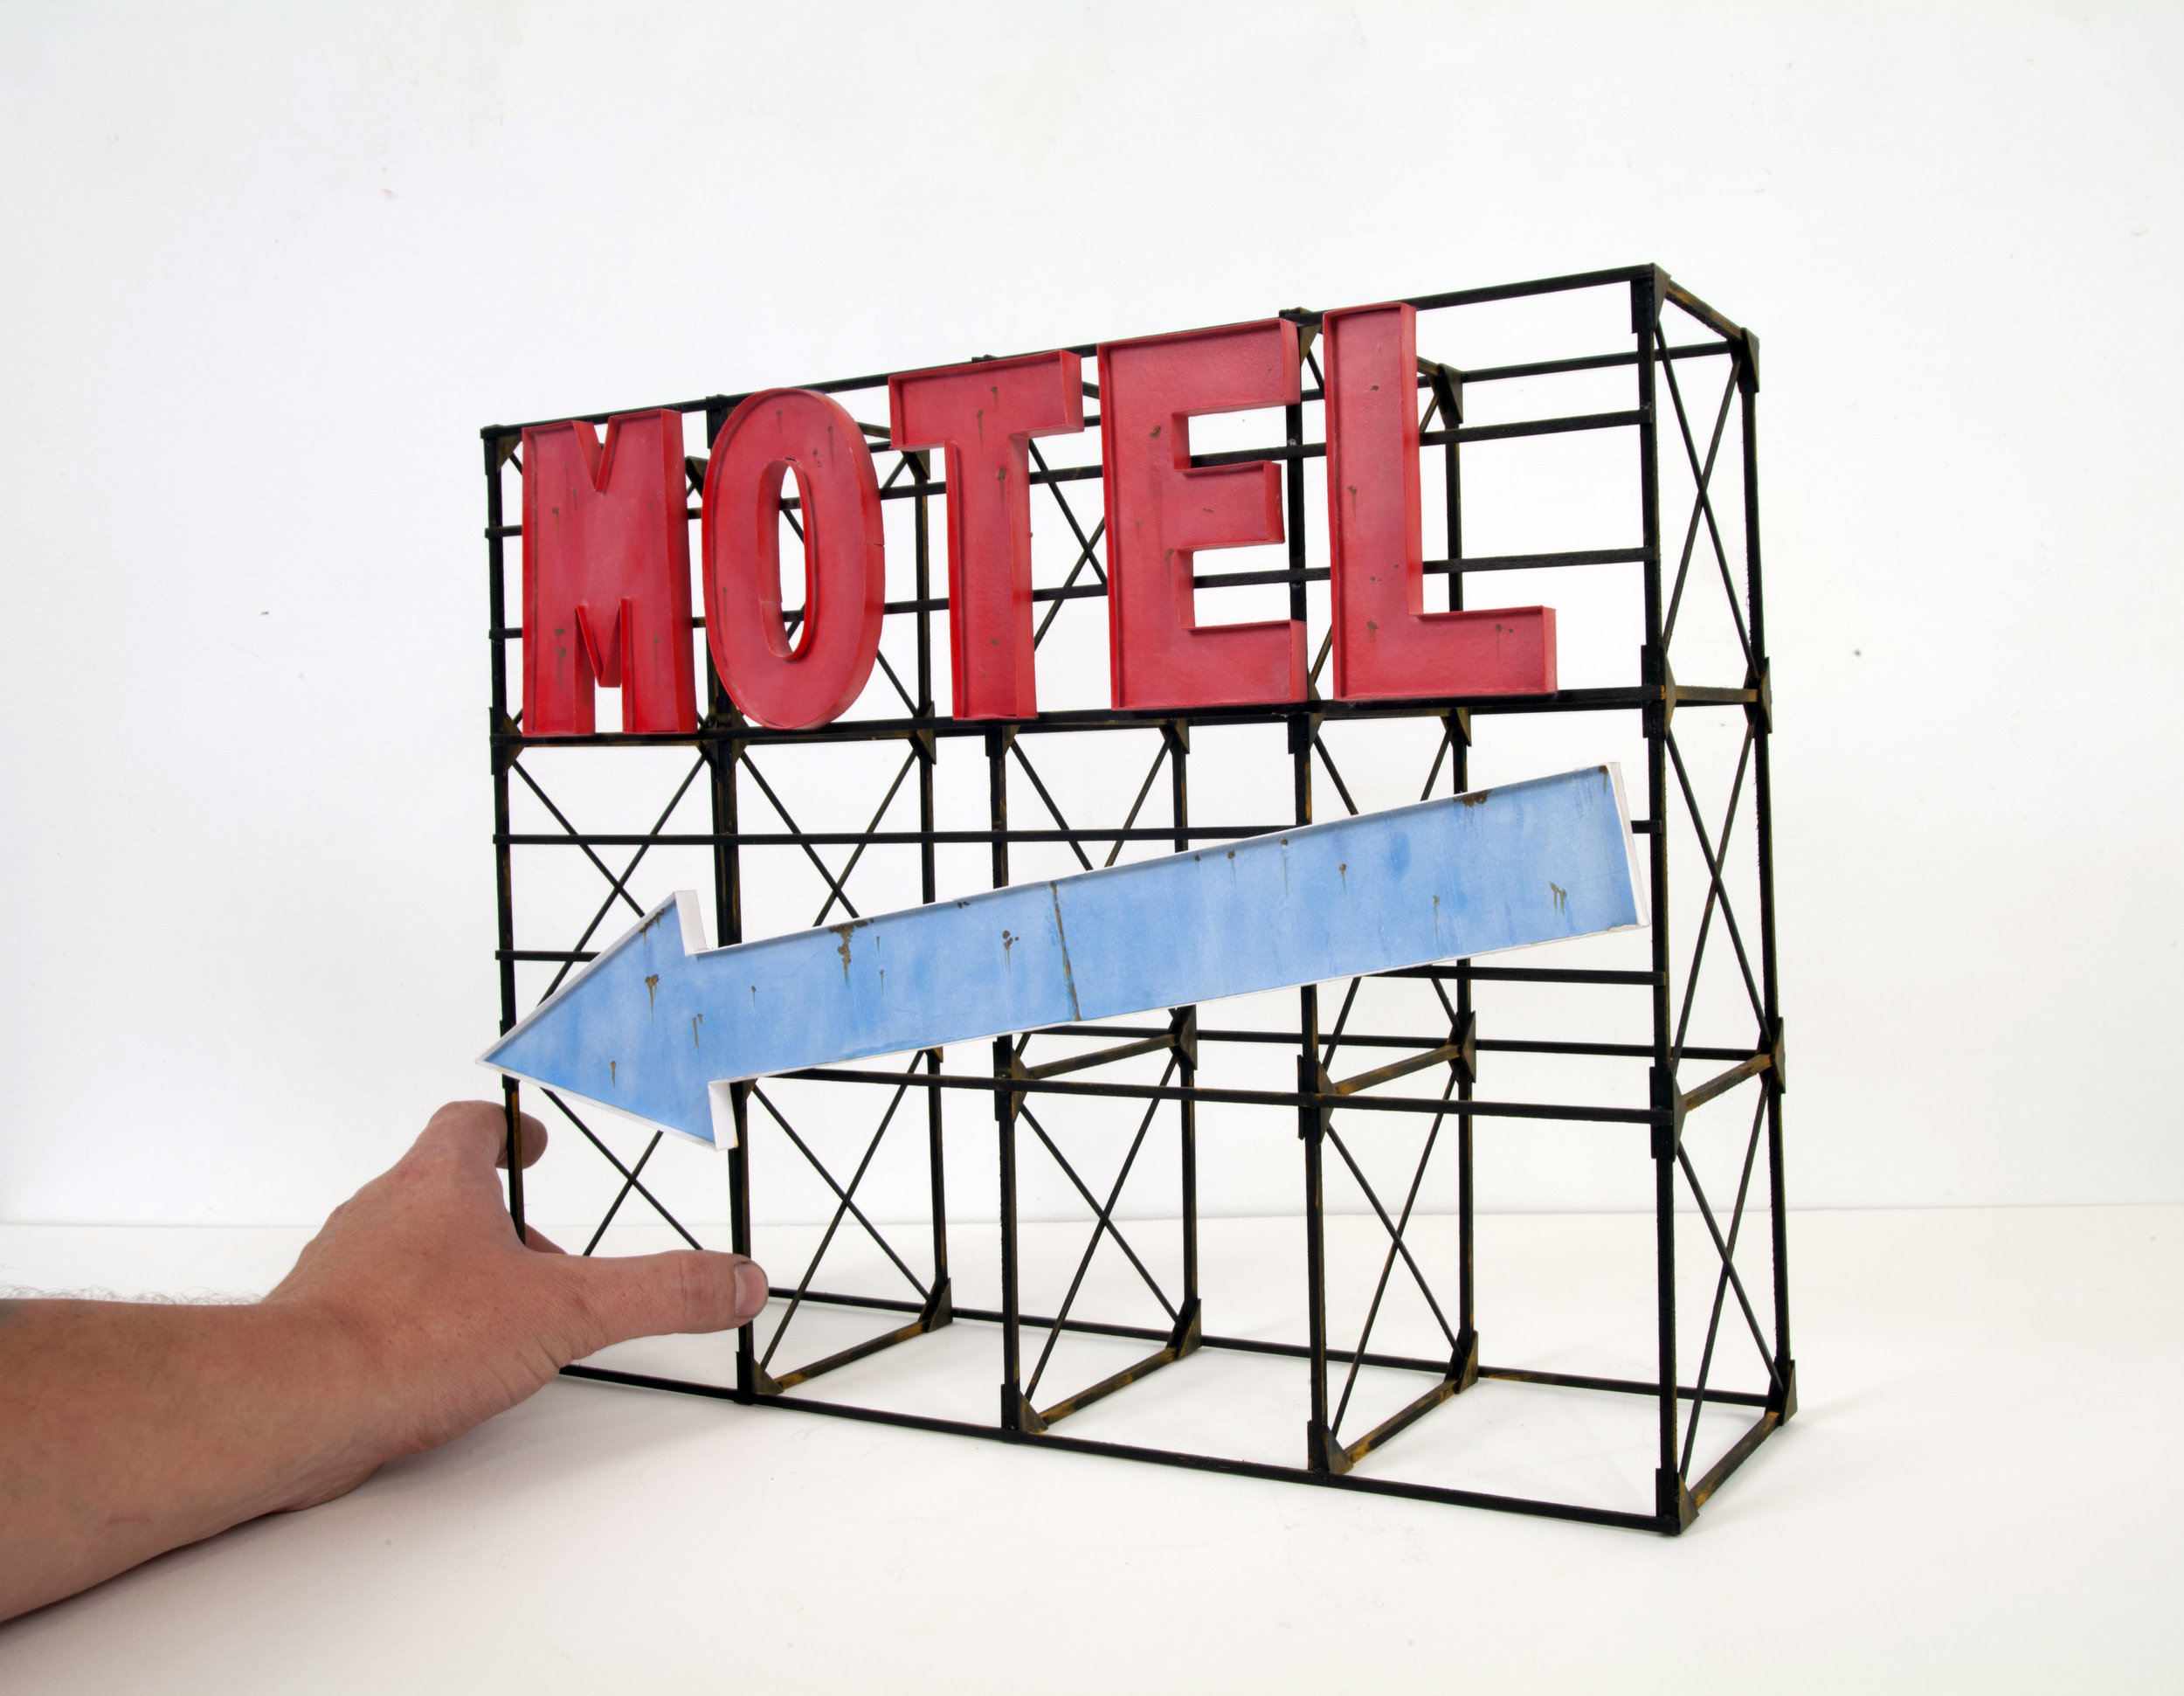 Motel Sign with Arrow - SOLD